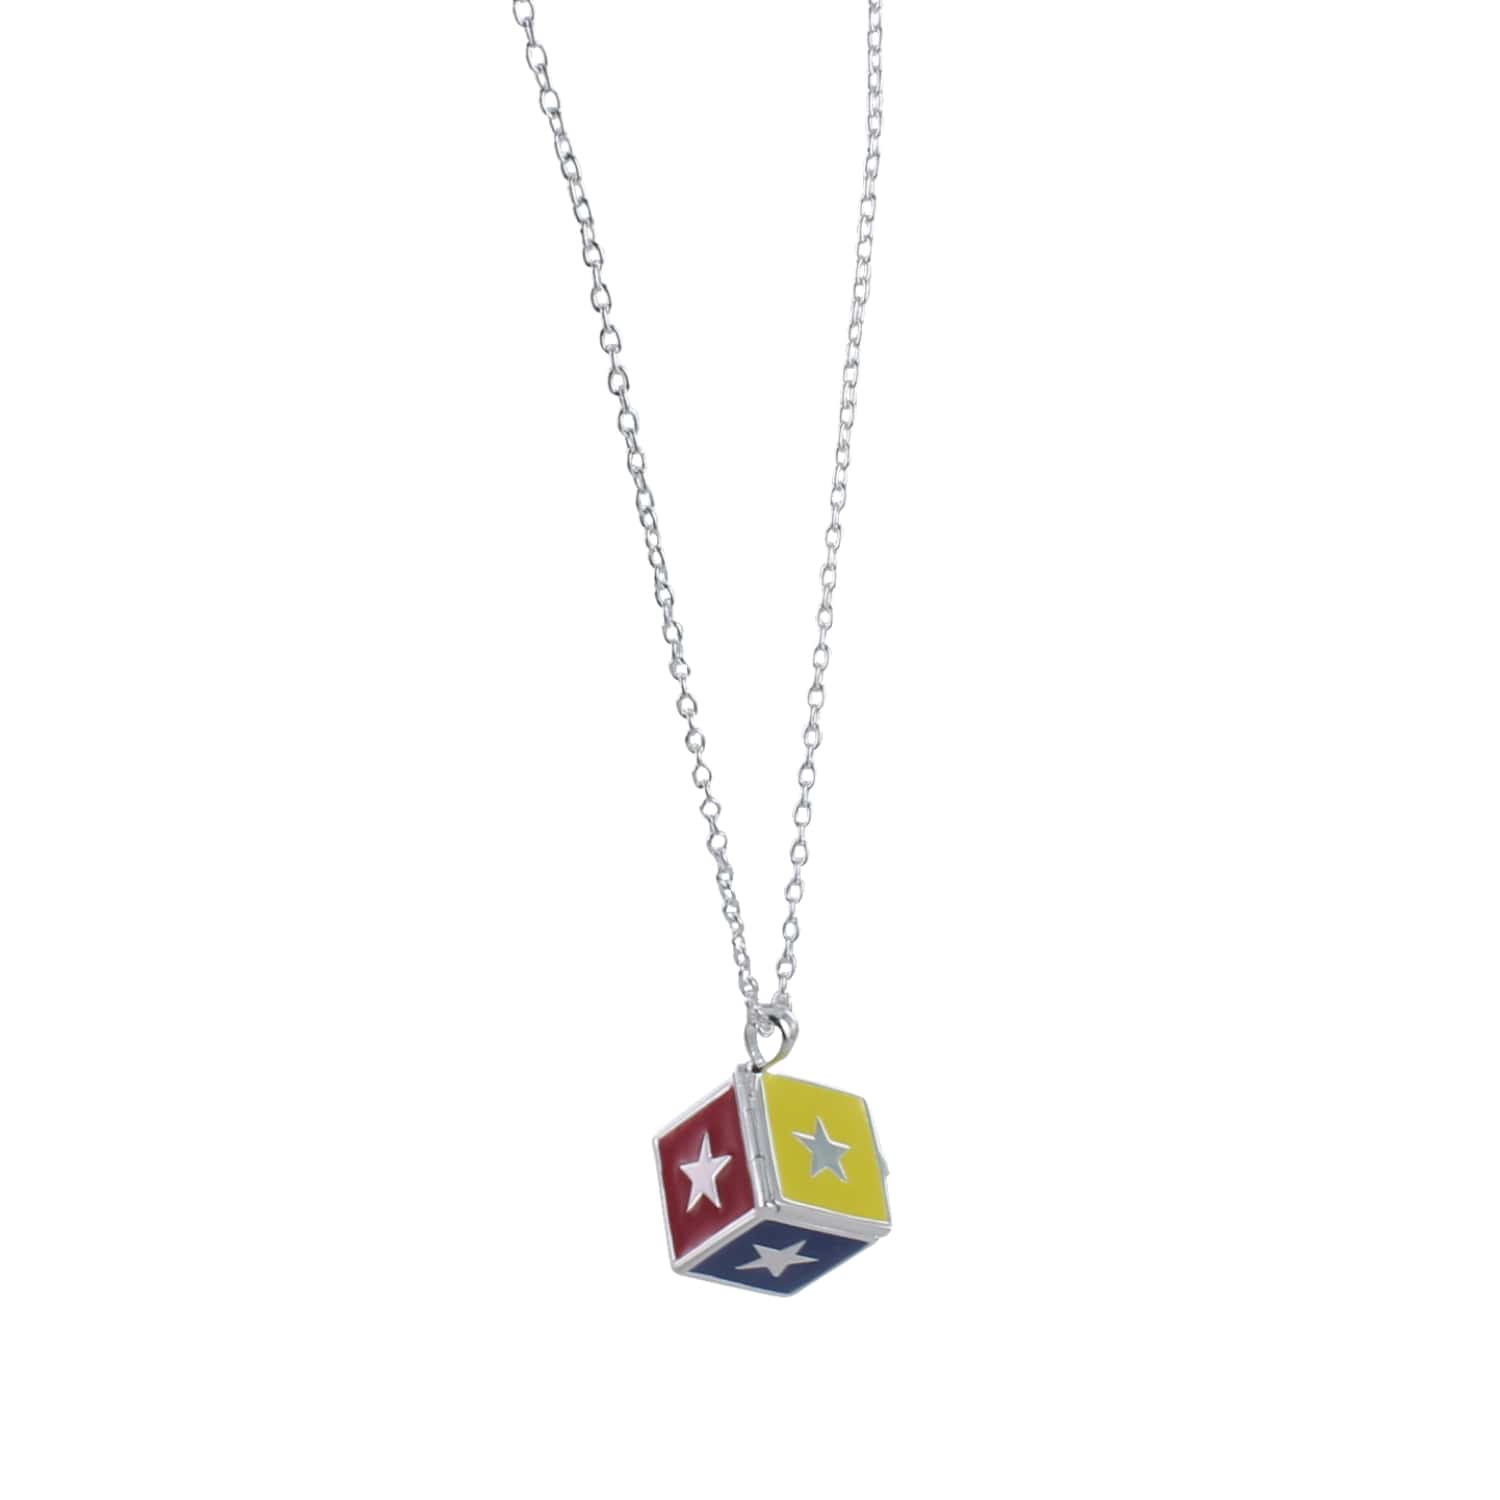 Reeves & Reeves Women's Silver / Red / Blue Jack In A Box Necklace In Gray